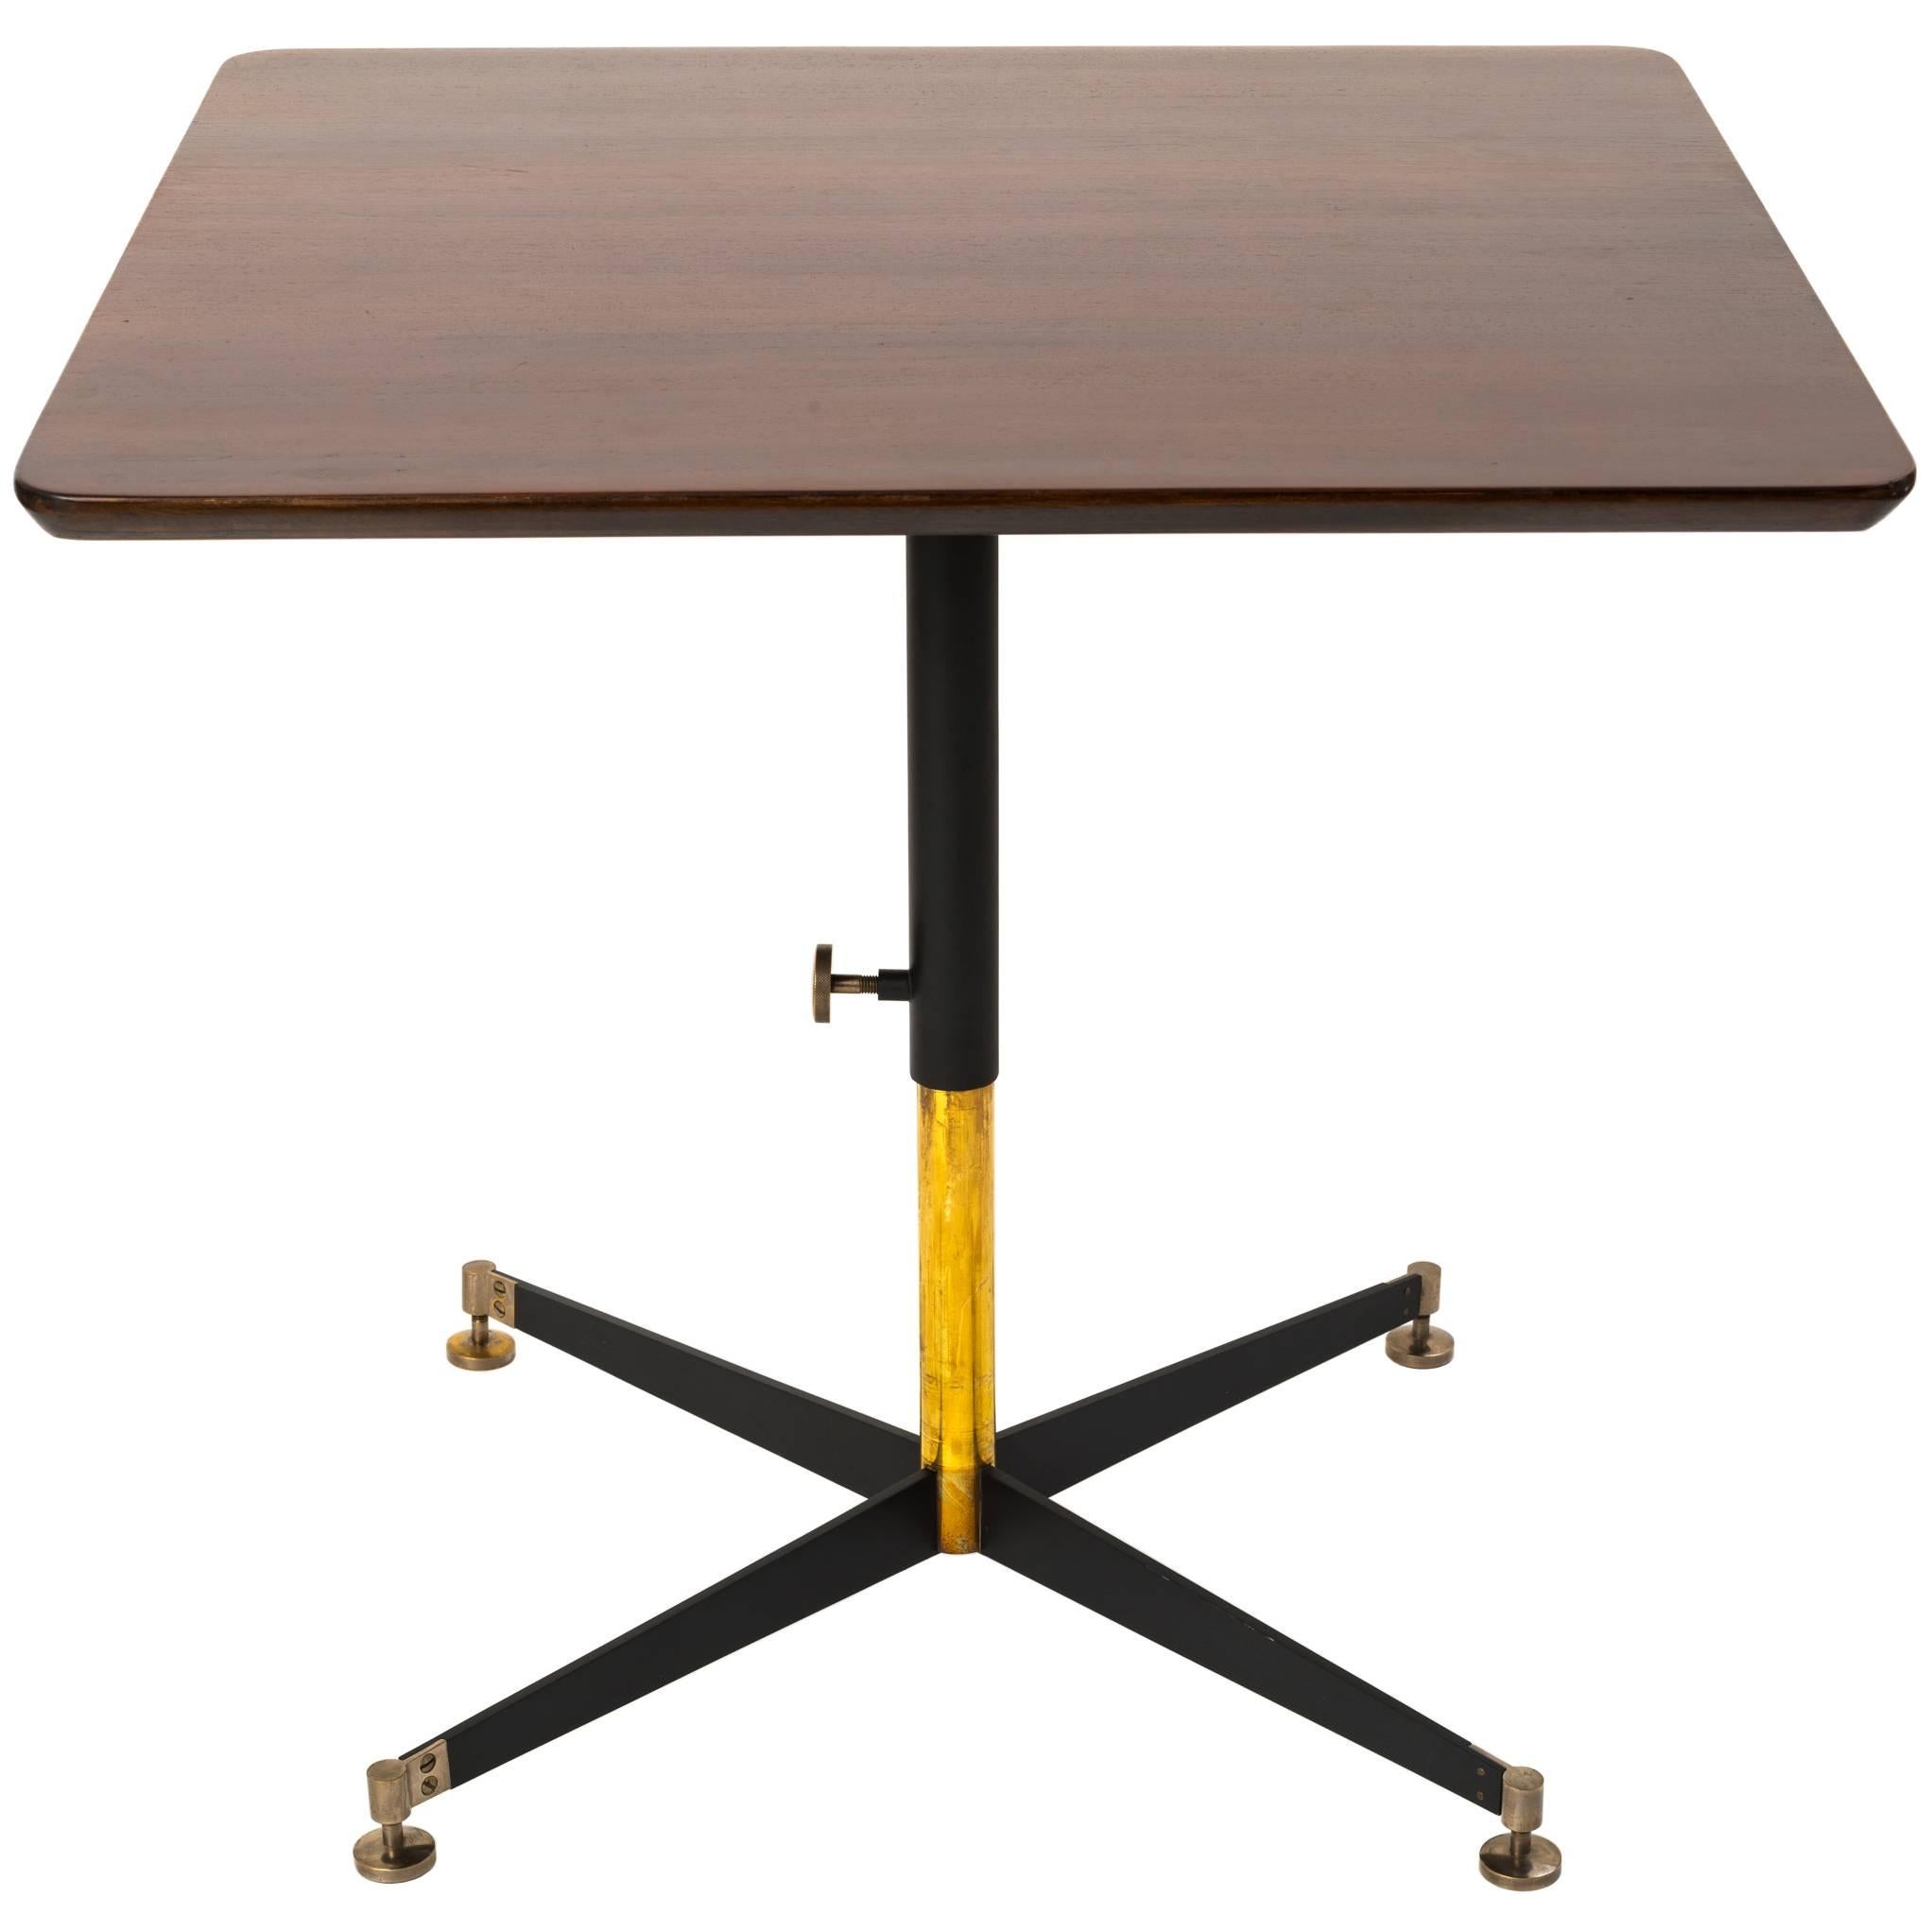 Ignazio Gardella T5 Adjustable Height Cocktail or Game Table in Cherry